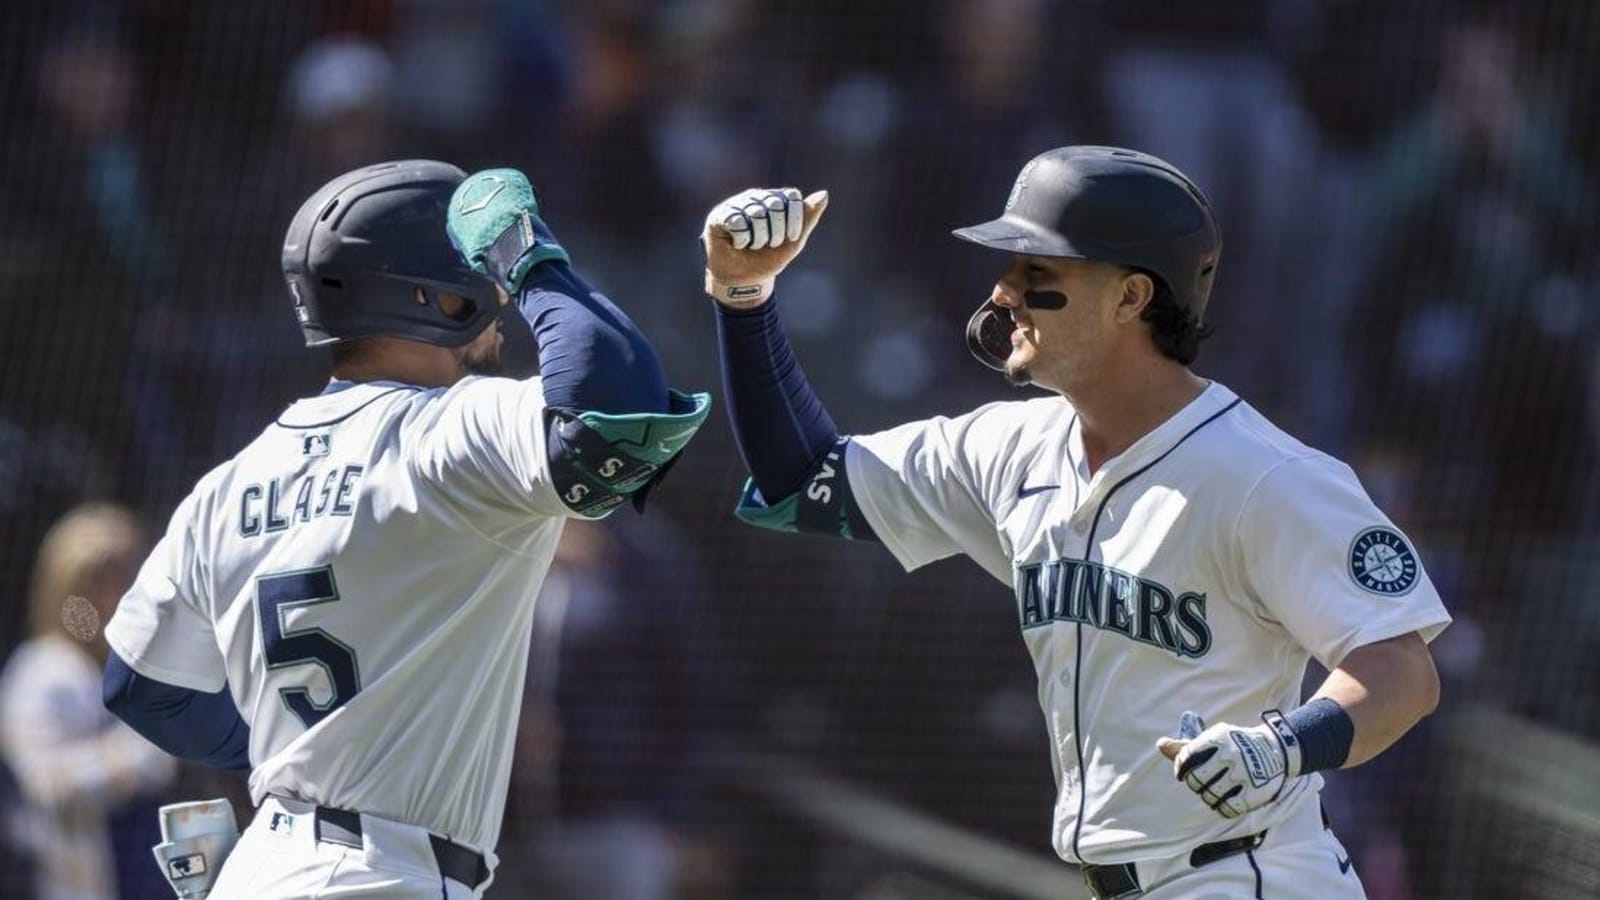 More confident Mariners look to take advantage of scuffling Rockies